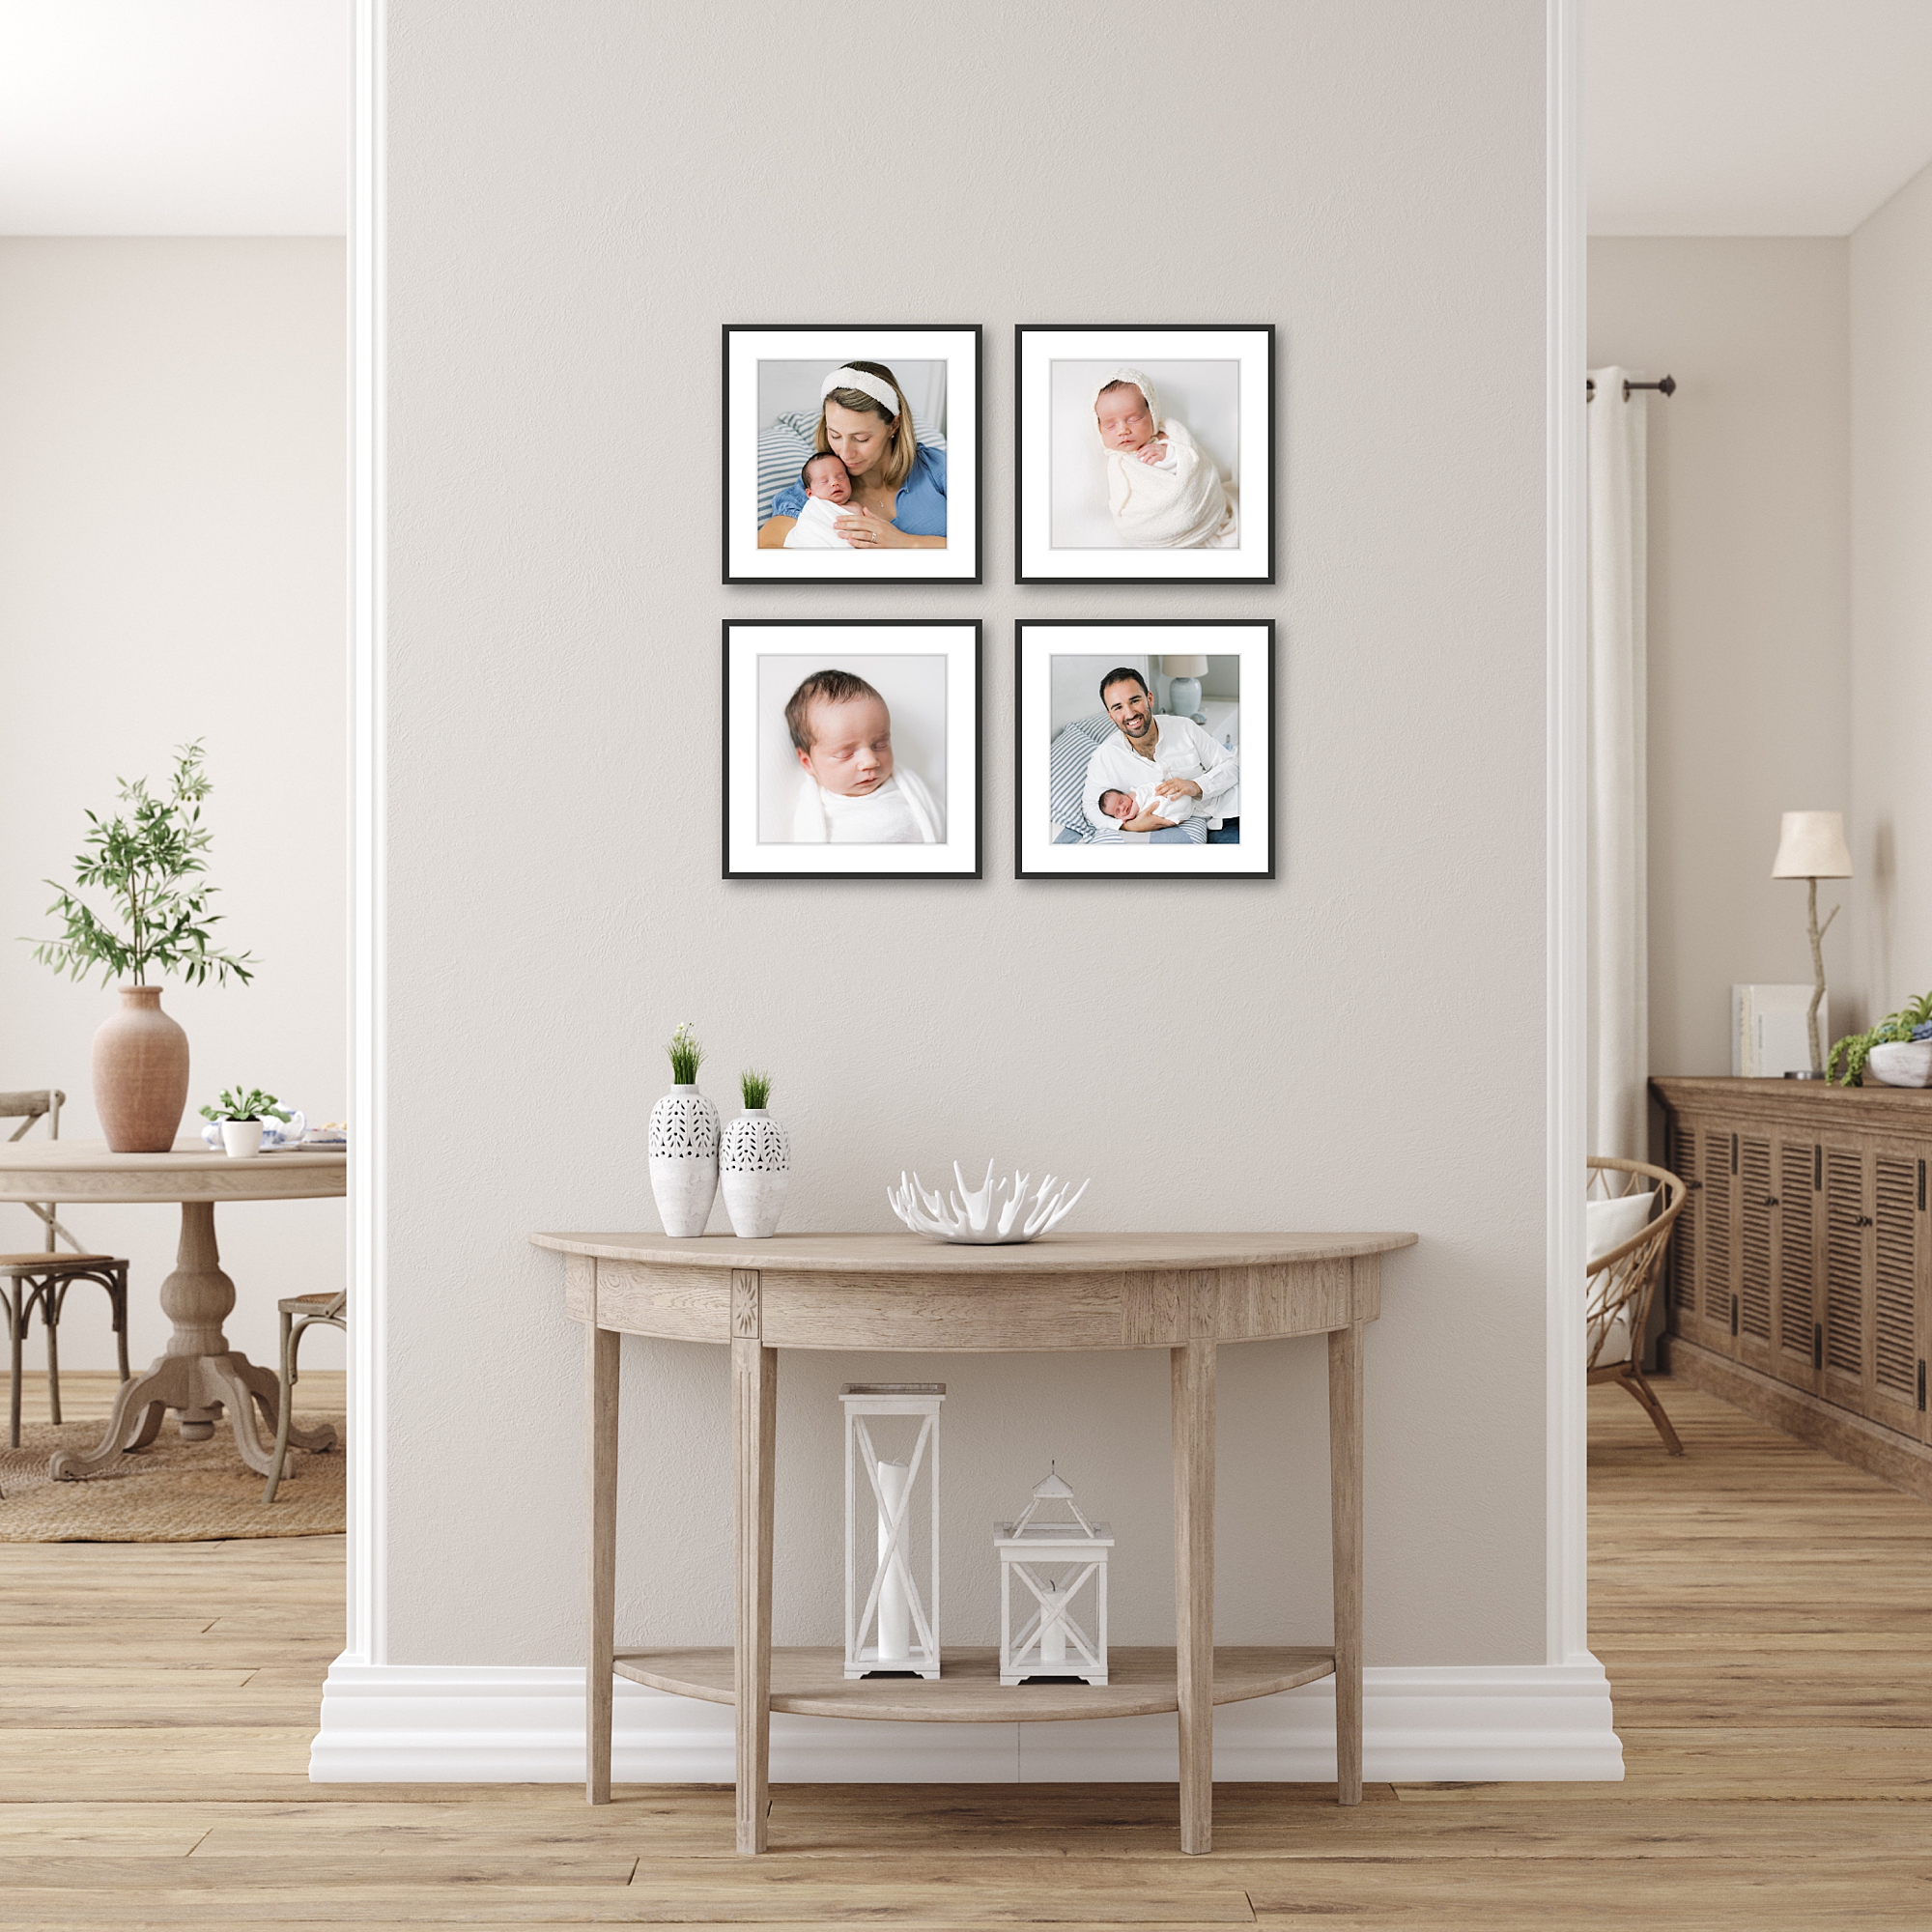 gallery wall in kitchen displaying family photos